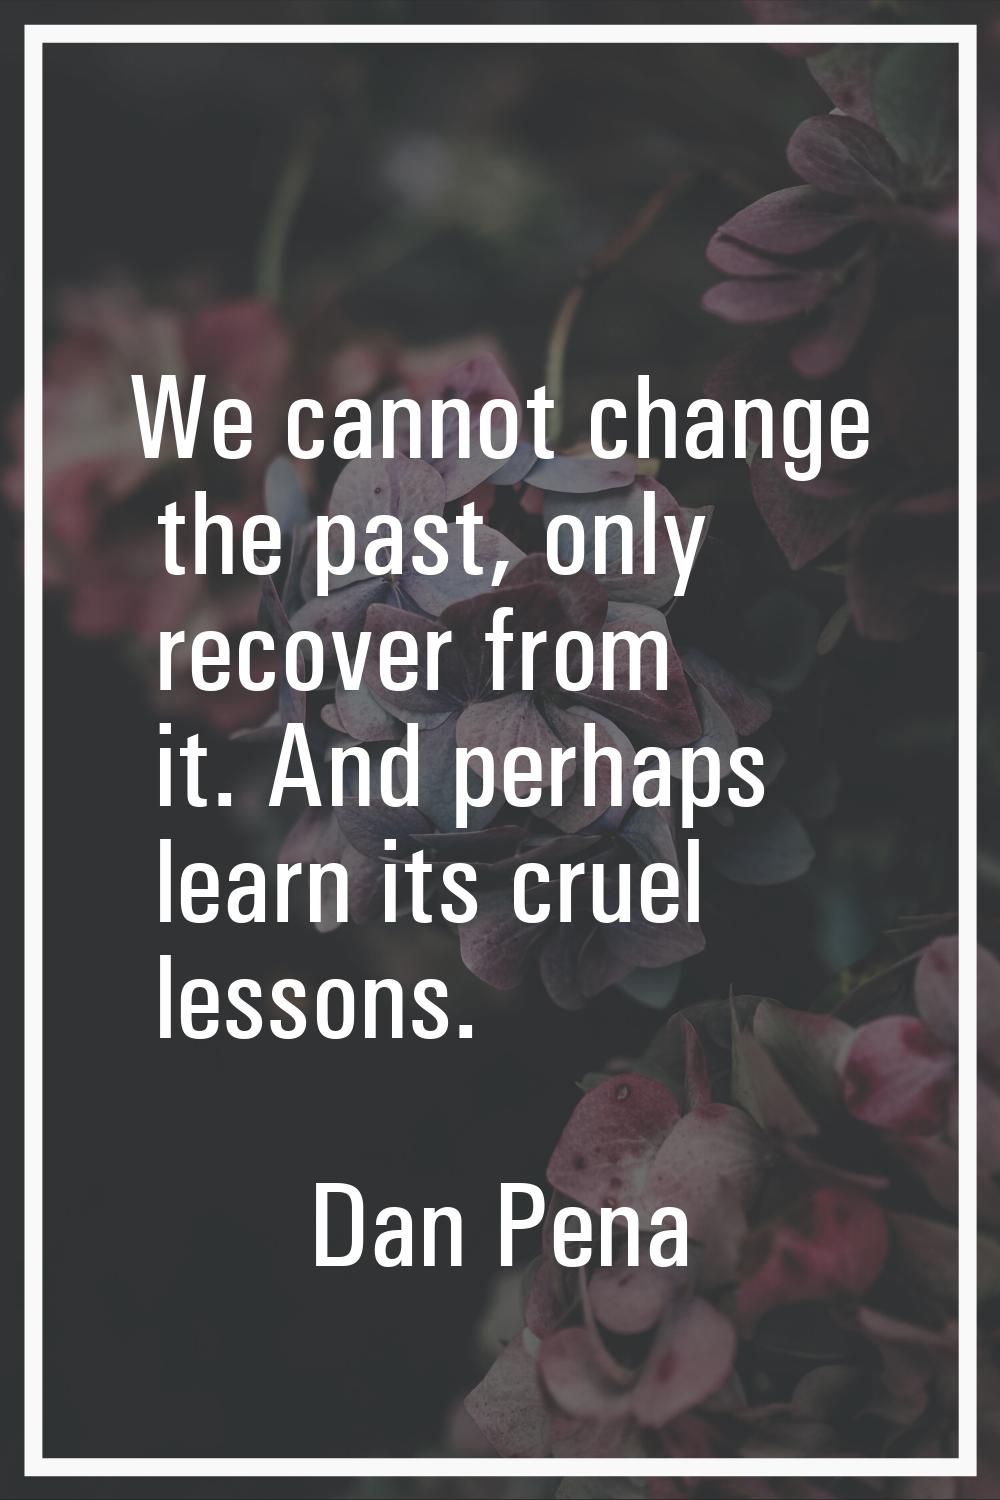 We cannot change the past, only recover from it. And perhaps learn its cruel lessons.